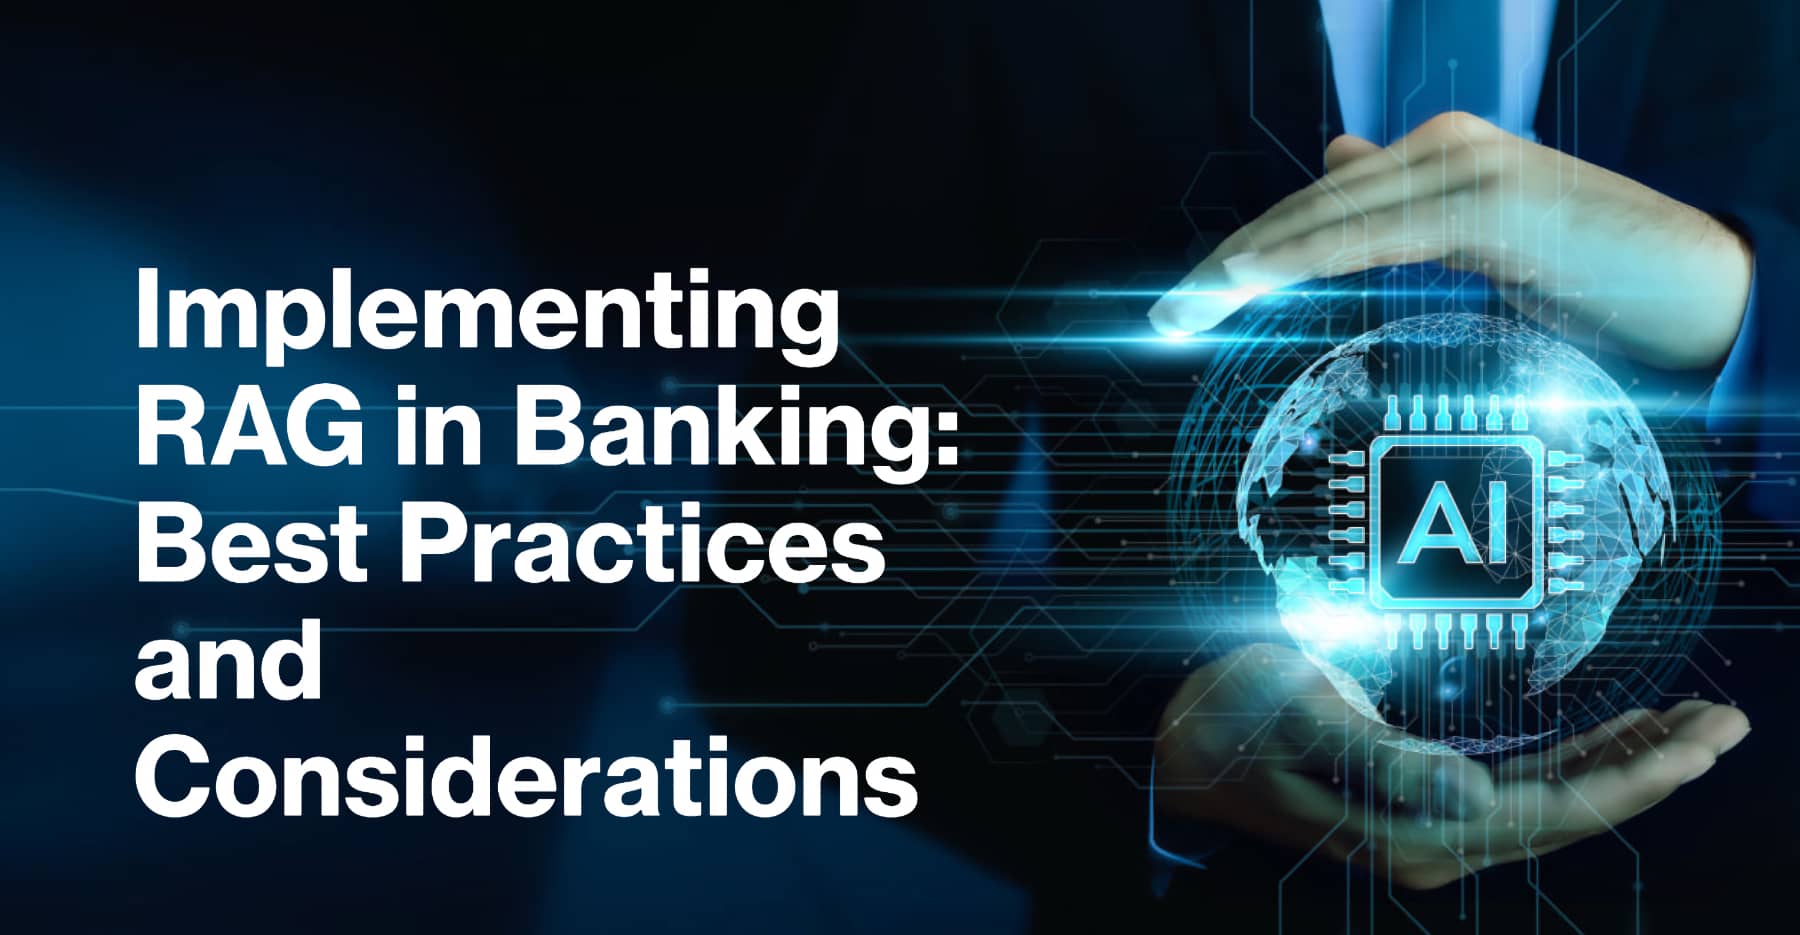 Implementing RAG in Banking: Best Practices and Considerations